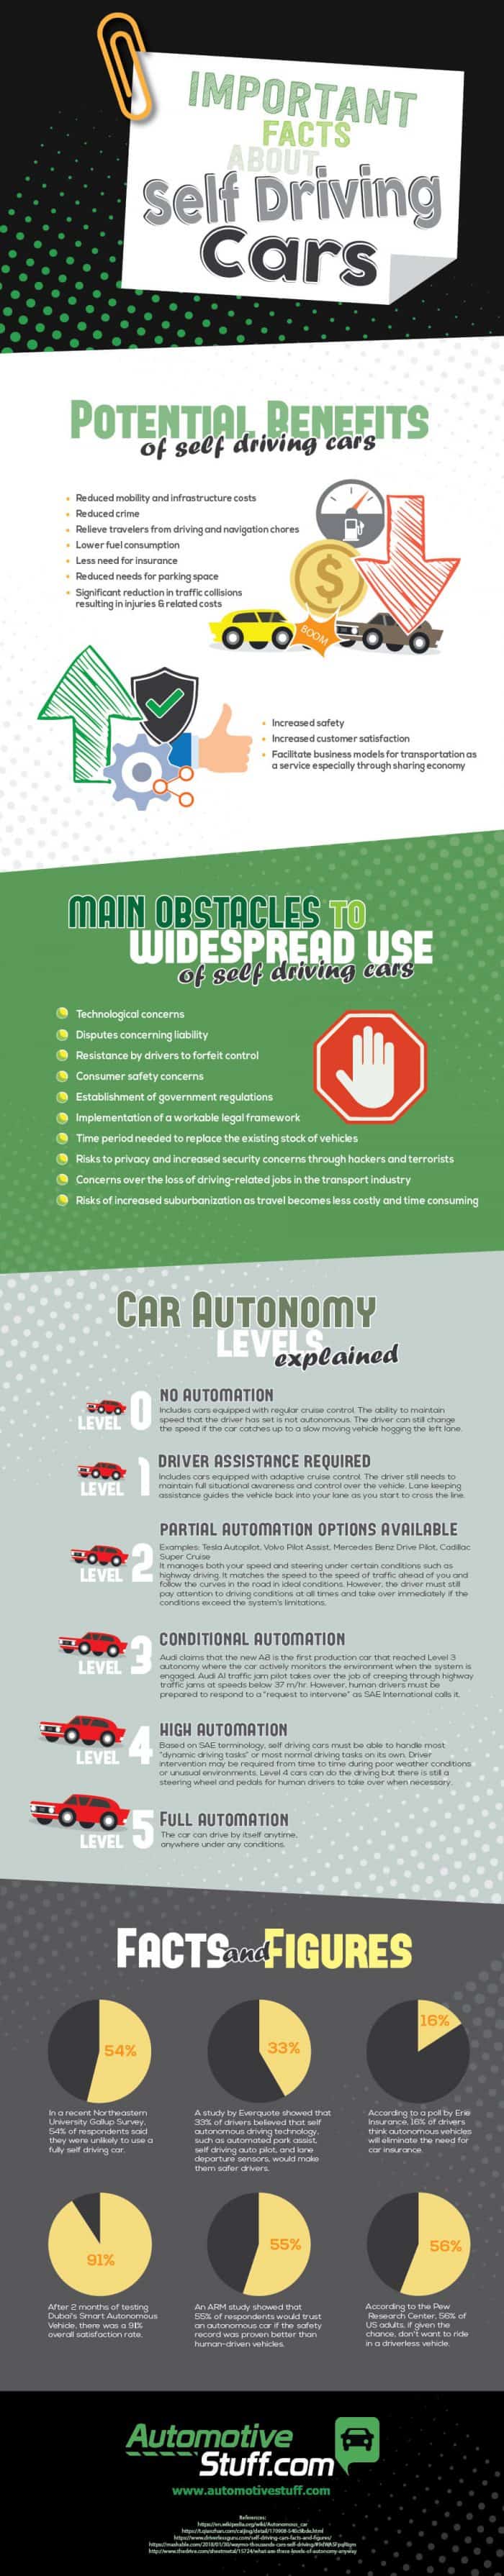 infographic describes the future of self-driving cars, including elon musk's thoughts on where the industry is heading